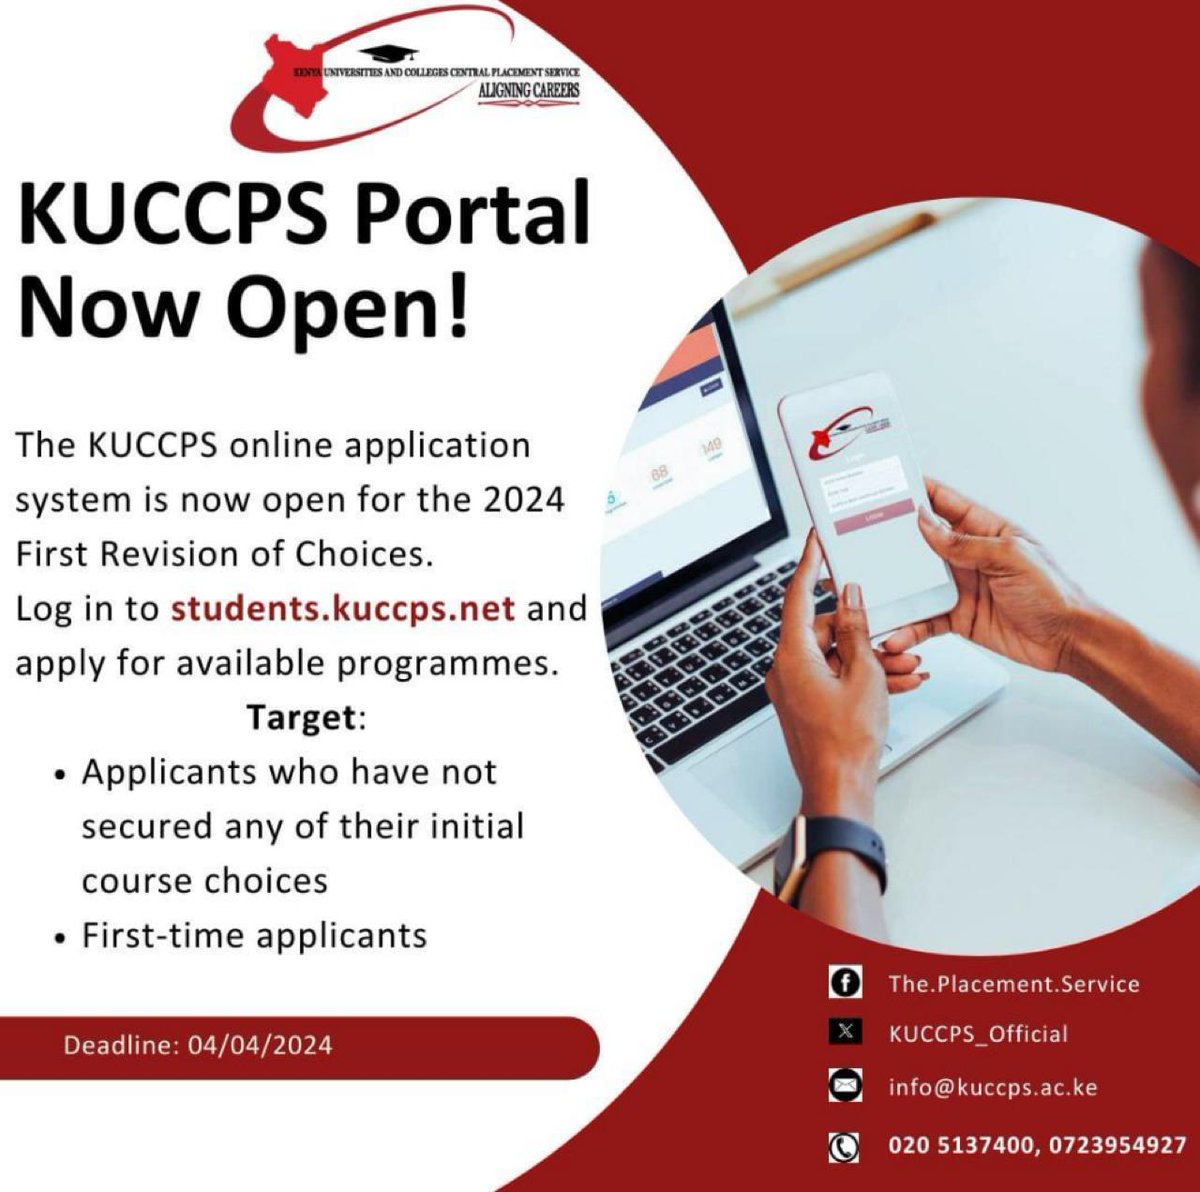 Deadline is today at 00.00hrs, have you applied? #otti #KUCCPS